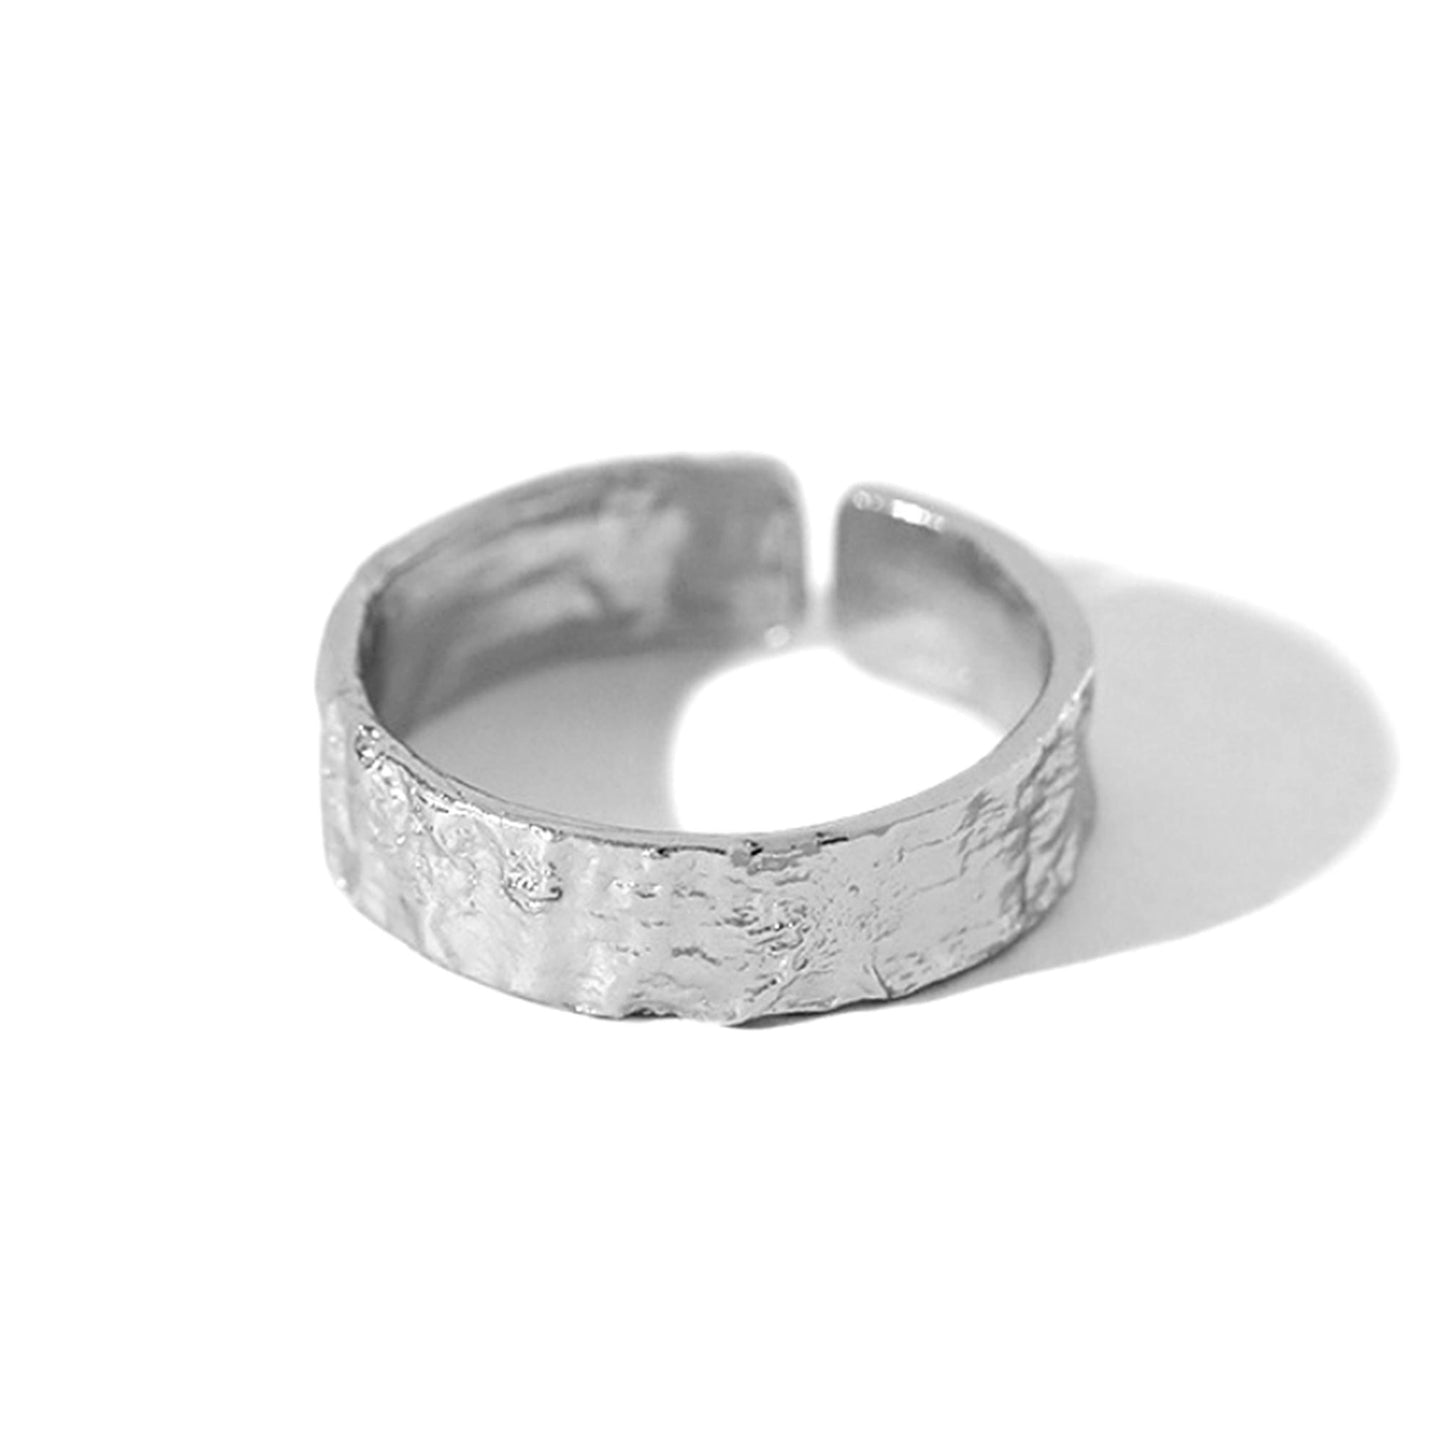 Textured Silver Ring with Hammered Foil Finish in sterling silver - sugarkittenlondon